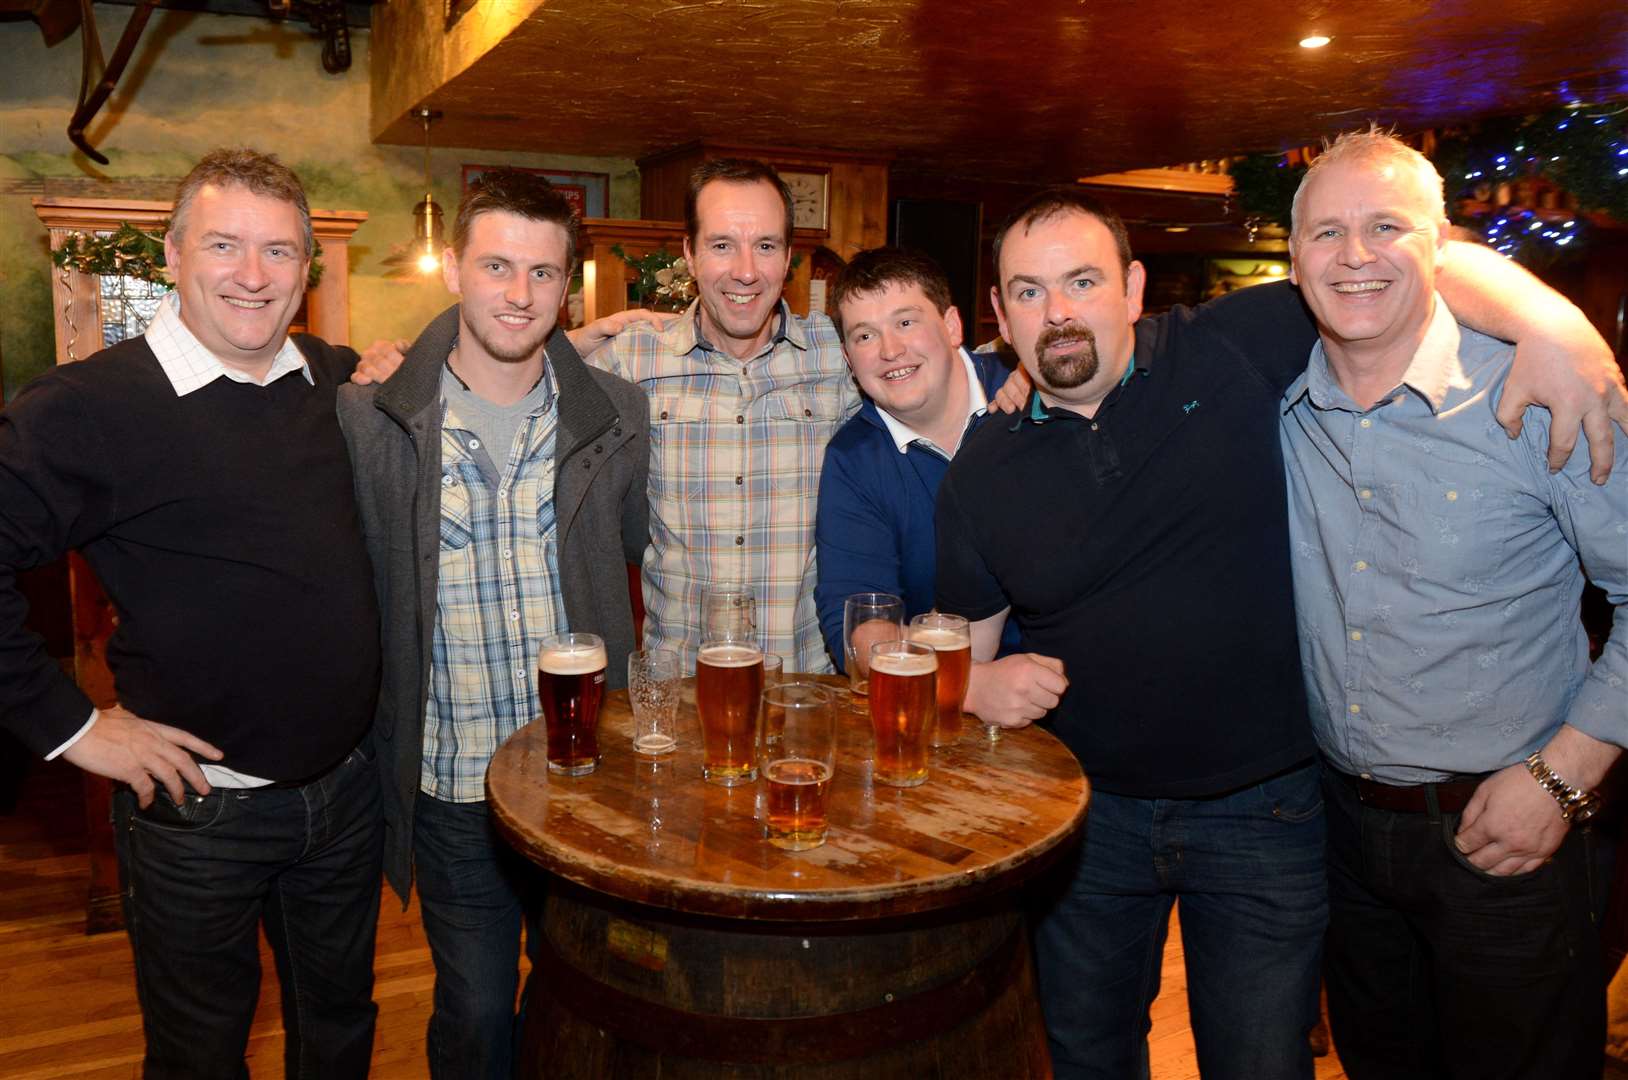 Bob Brown, Andy Brown, George Pritchard, Matthew Steele, Brenden Dessry and Sean O'Brian from Landmark Forest Adventure Park on their work night out. Picture: Alasdair Allen. Image No. 020735.